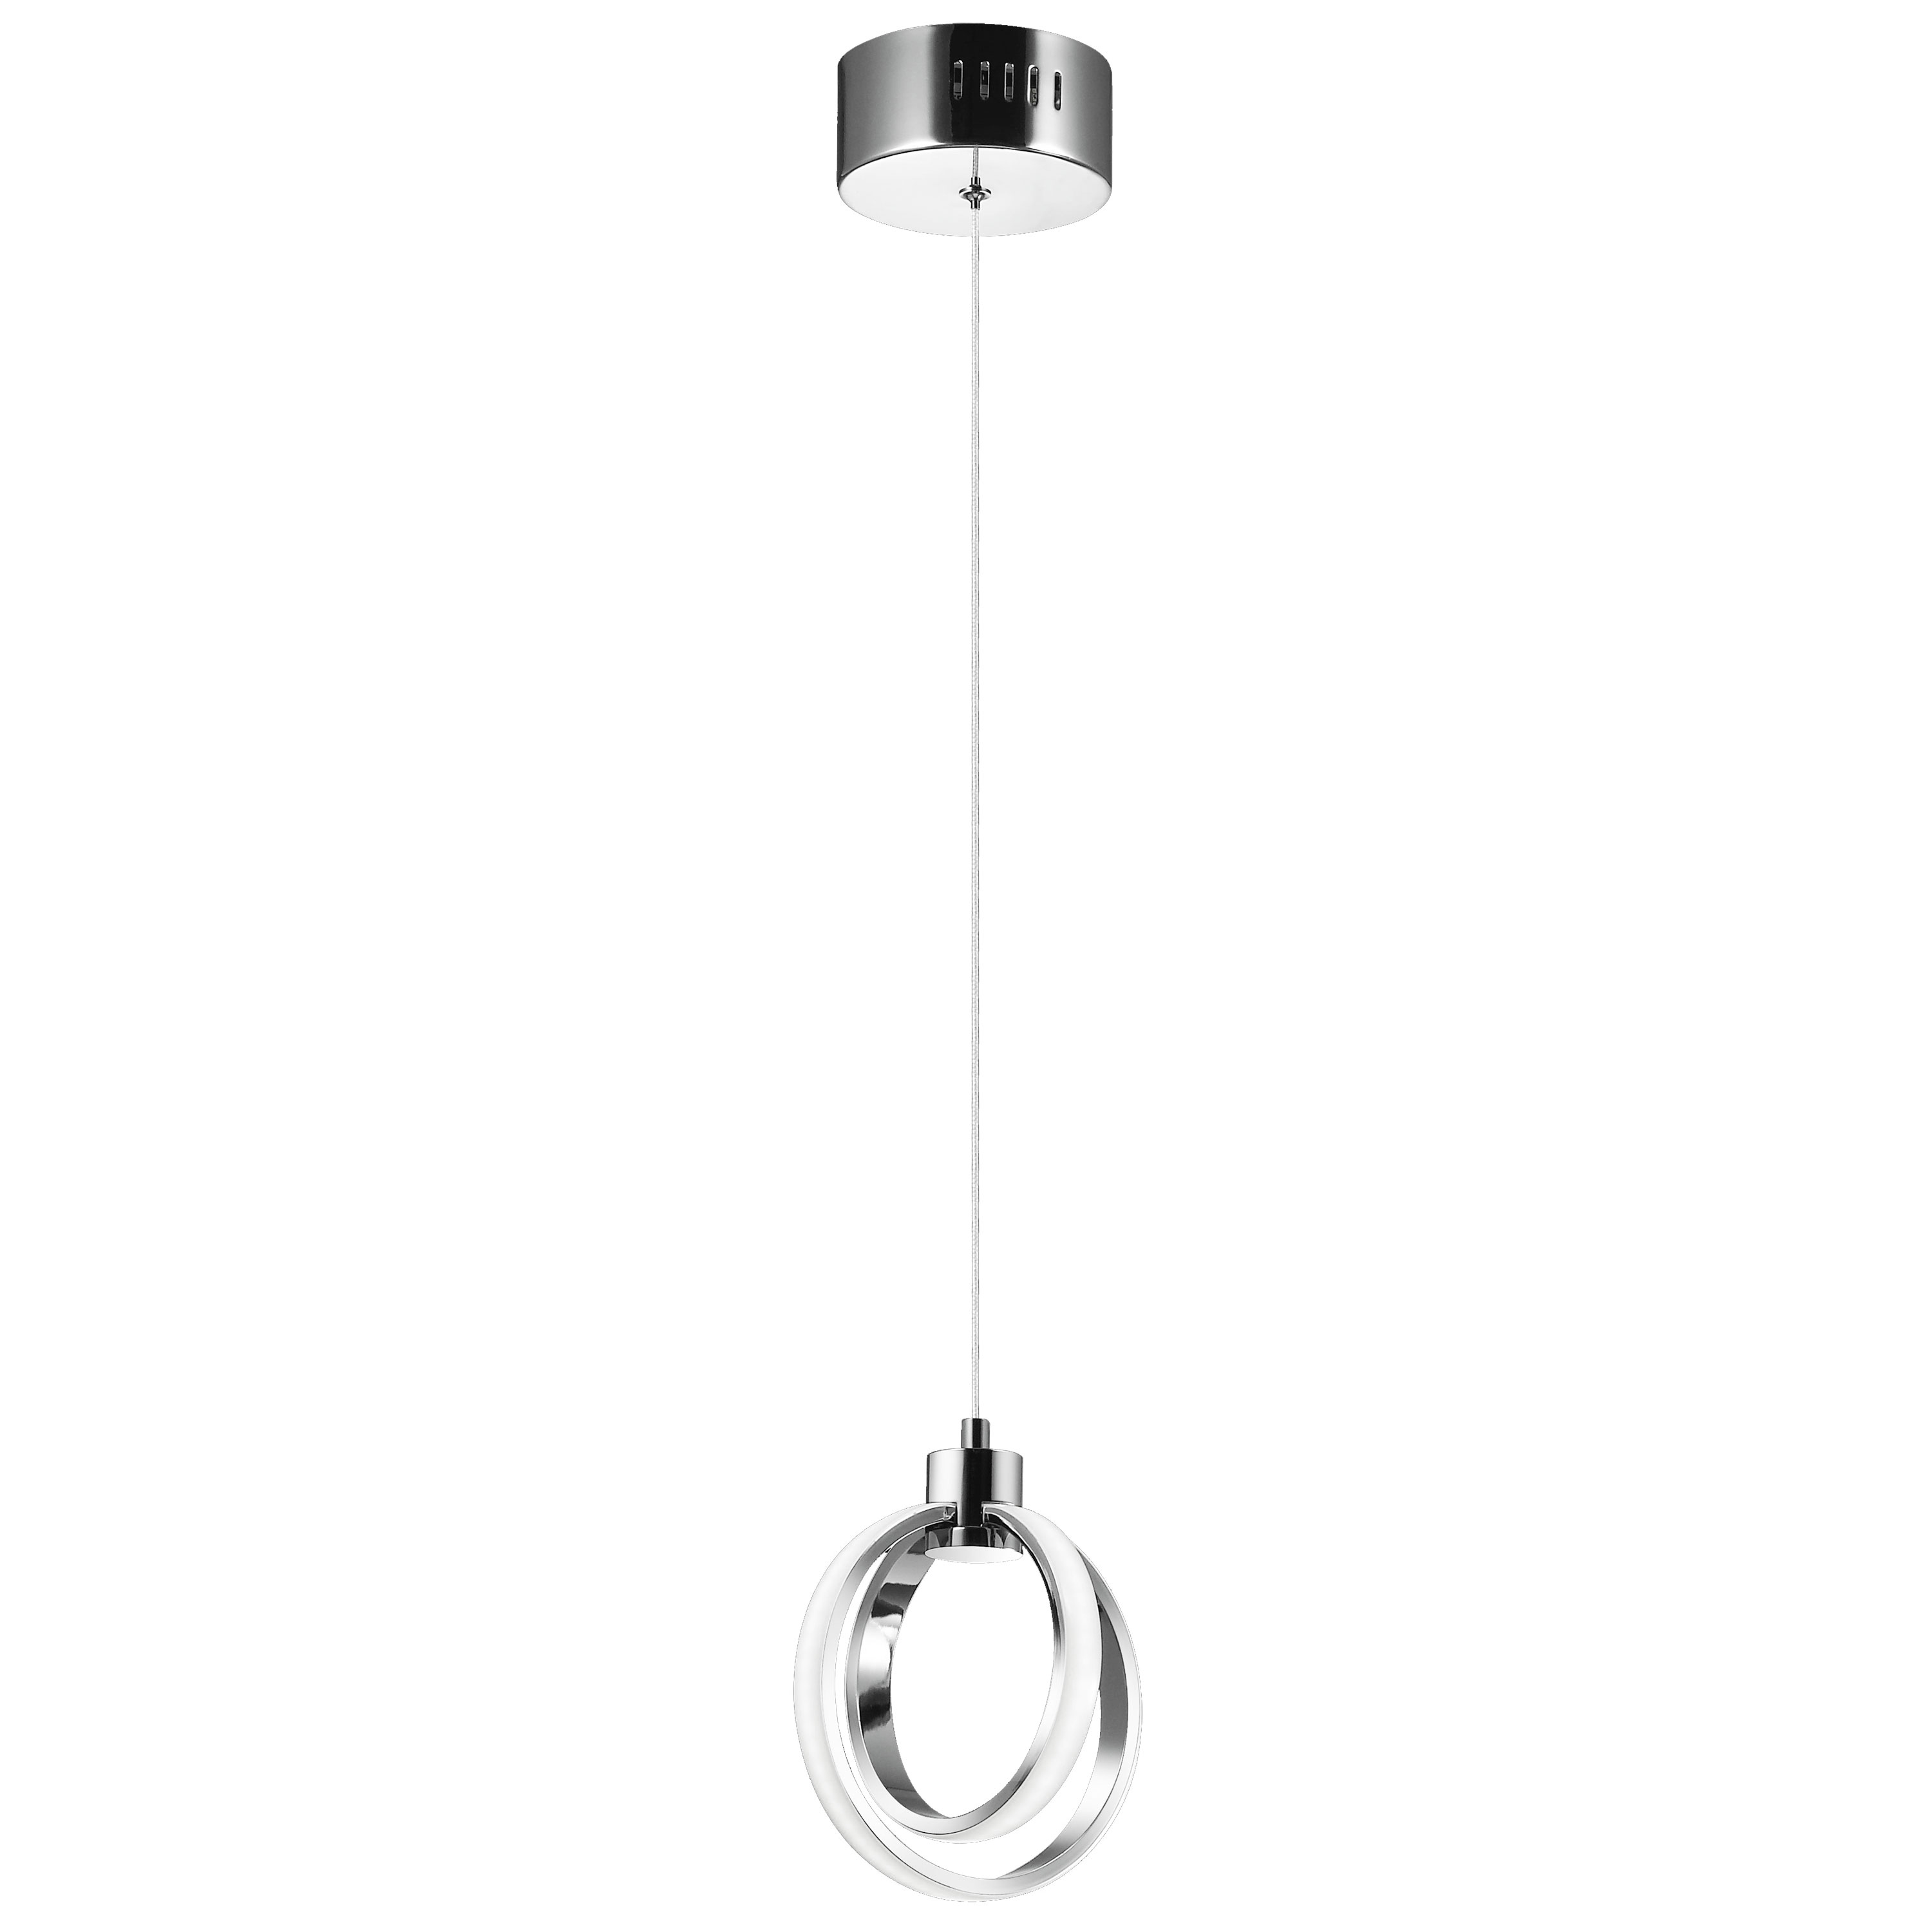 The Parson family of lighting exhibits undeniably artistic flair in a decidedly contemporary mode. Based on the instant appeal of open circles in a stylish configuration, it's an instant eye-catcher no matter where you place it. A metal frame in your choice of finish creates an intriguing double circle construction. An LED light with a white silicone diffuser along the surface of the circle creates a chic contrast. Parson lighting is warm and skin-friendly, with a look that will create a focal point in your hallway, living room or bar area.